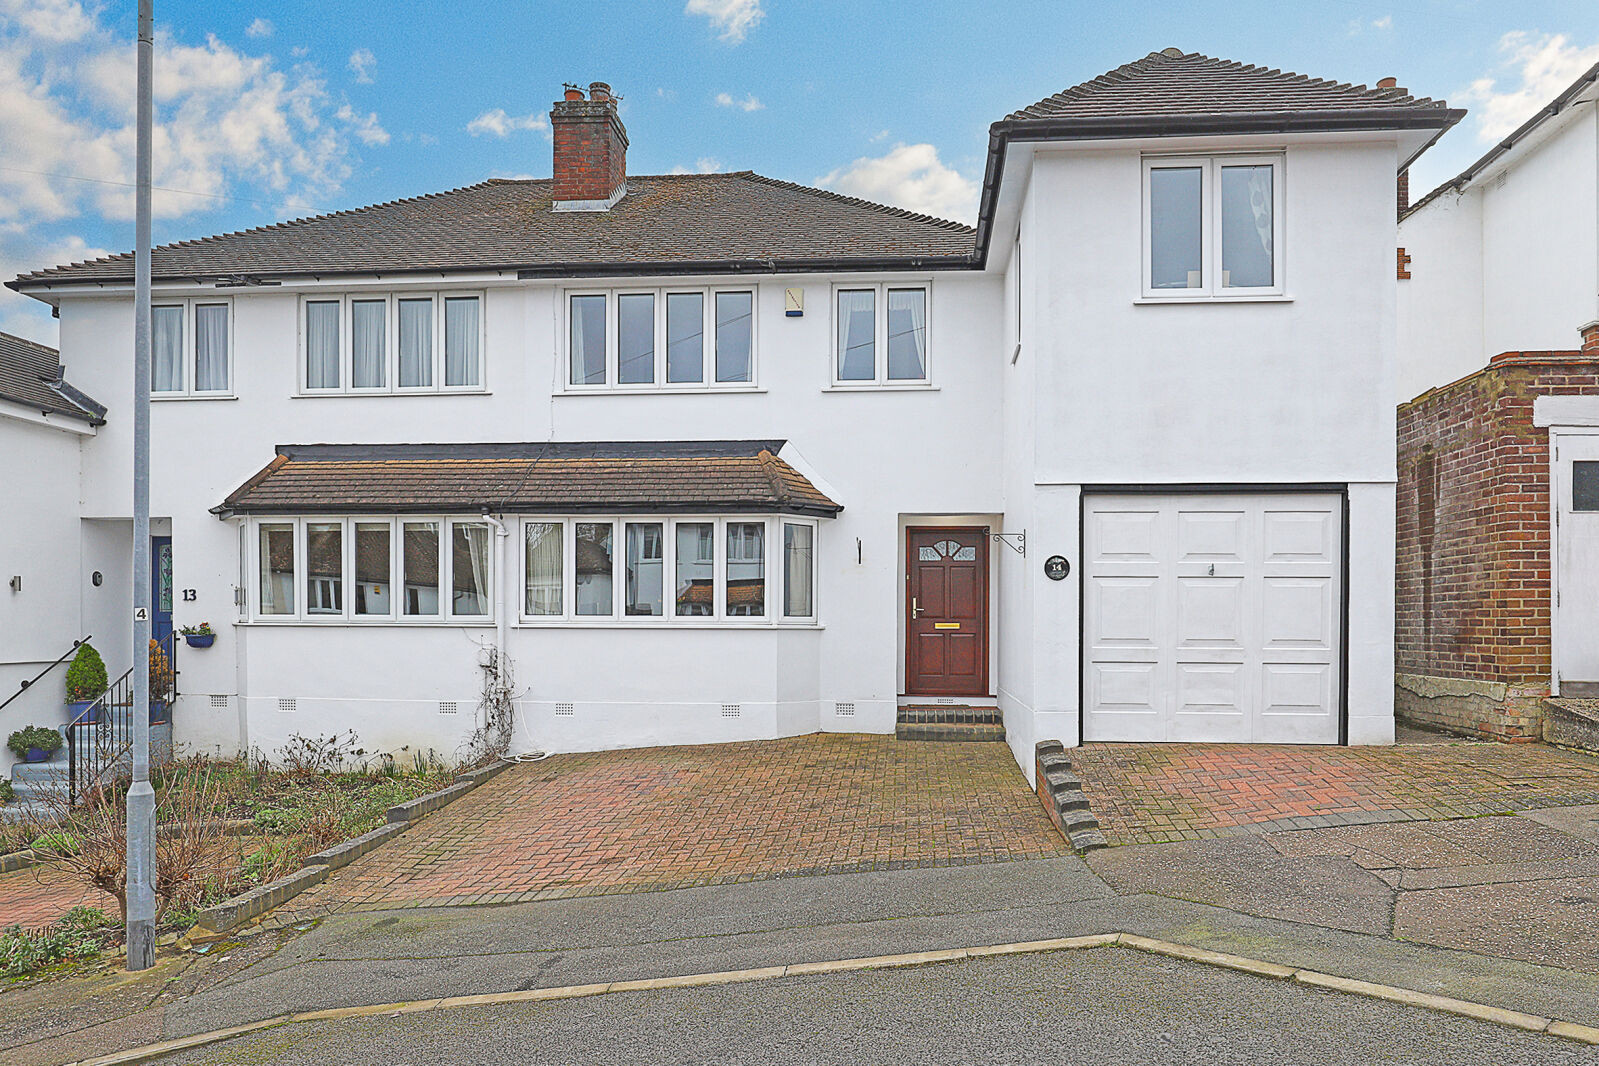 4 bedroom semi detached house for sale Roundmead Close, Loughton, IG10, main image